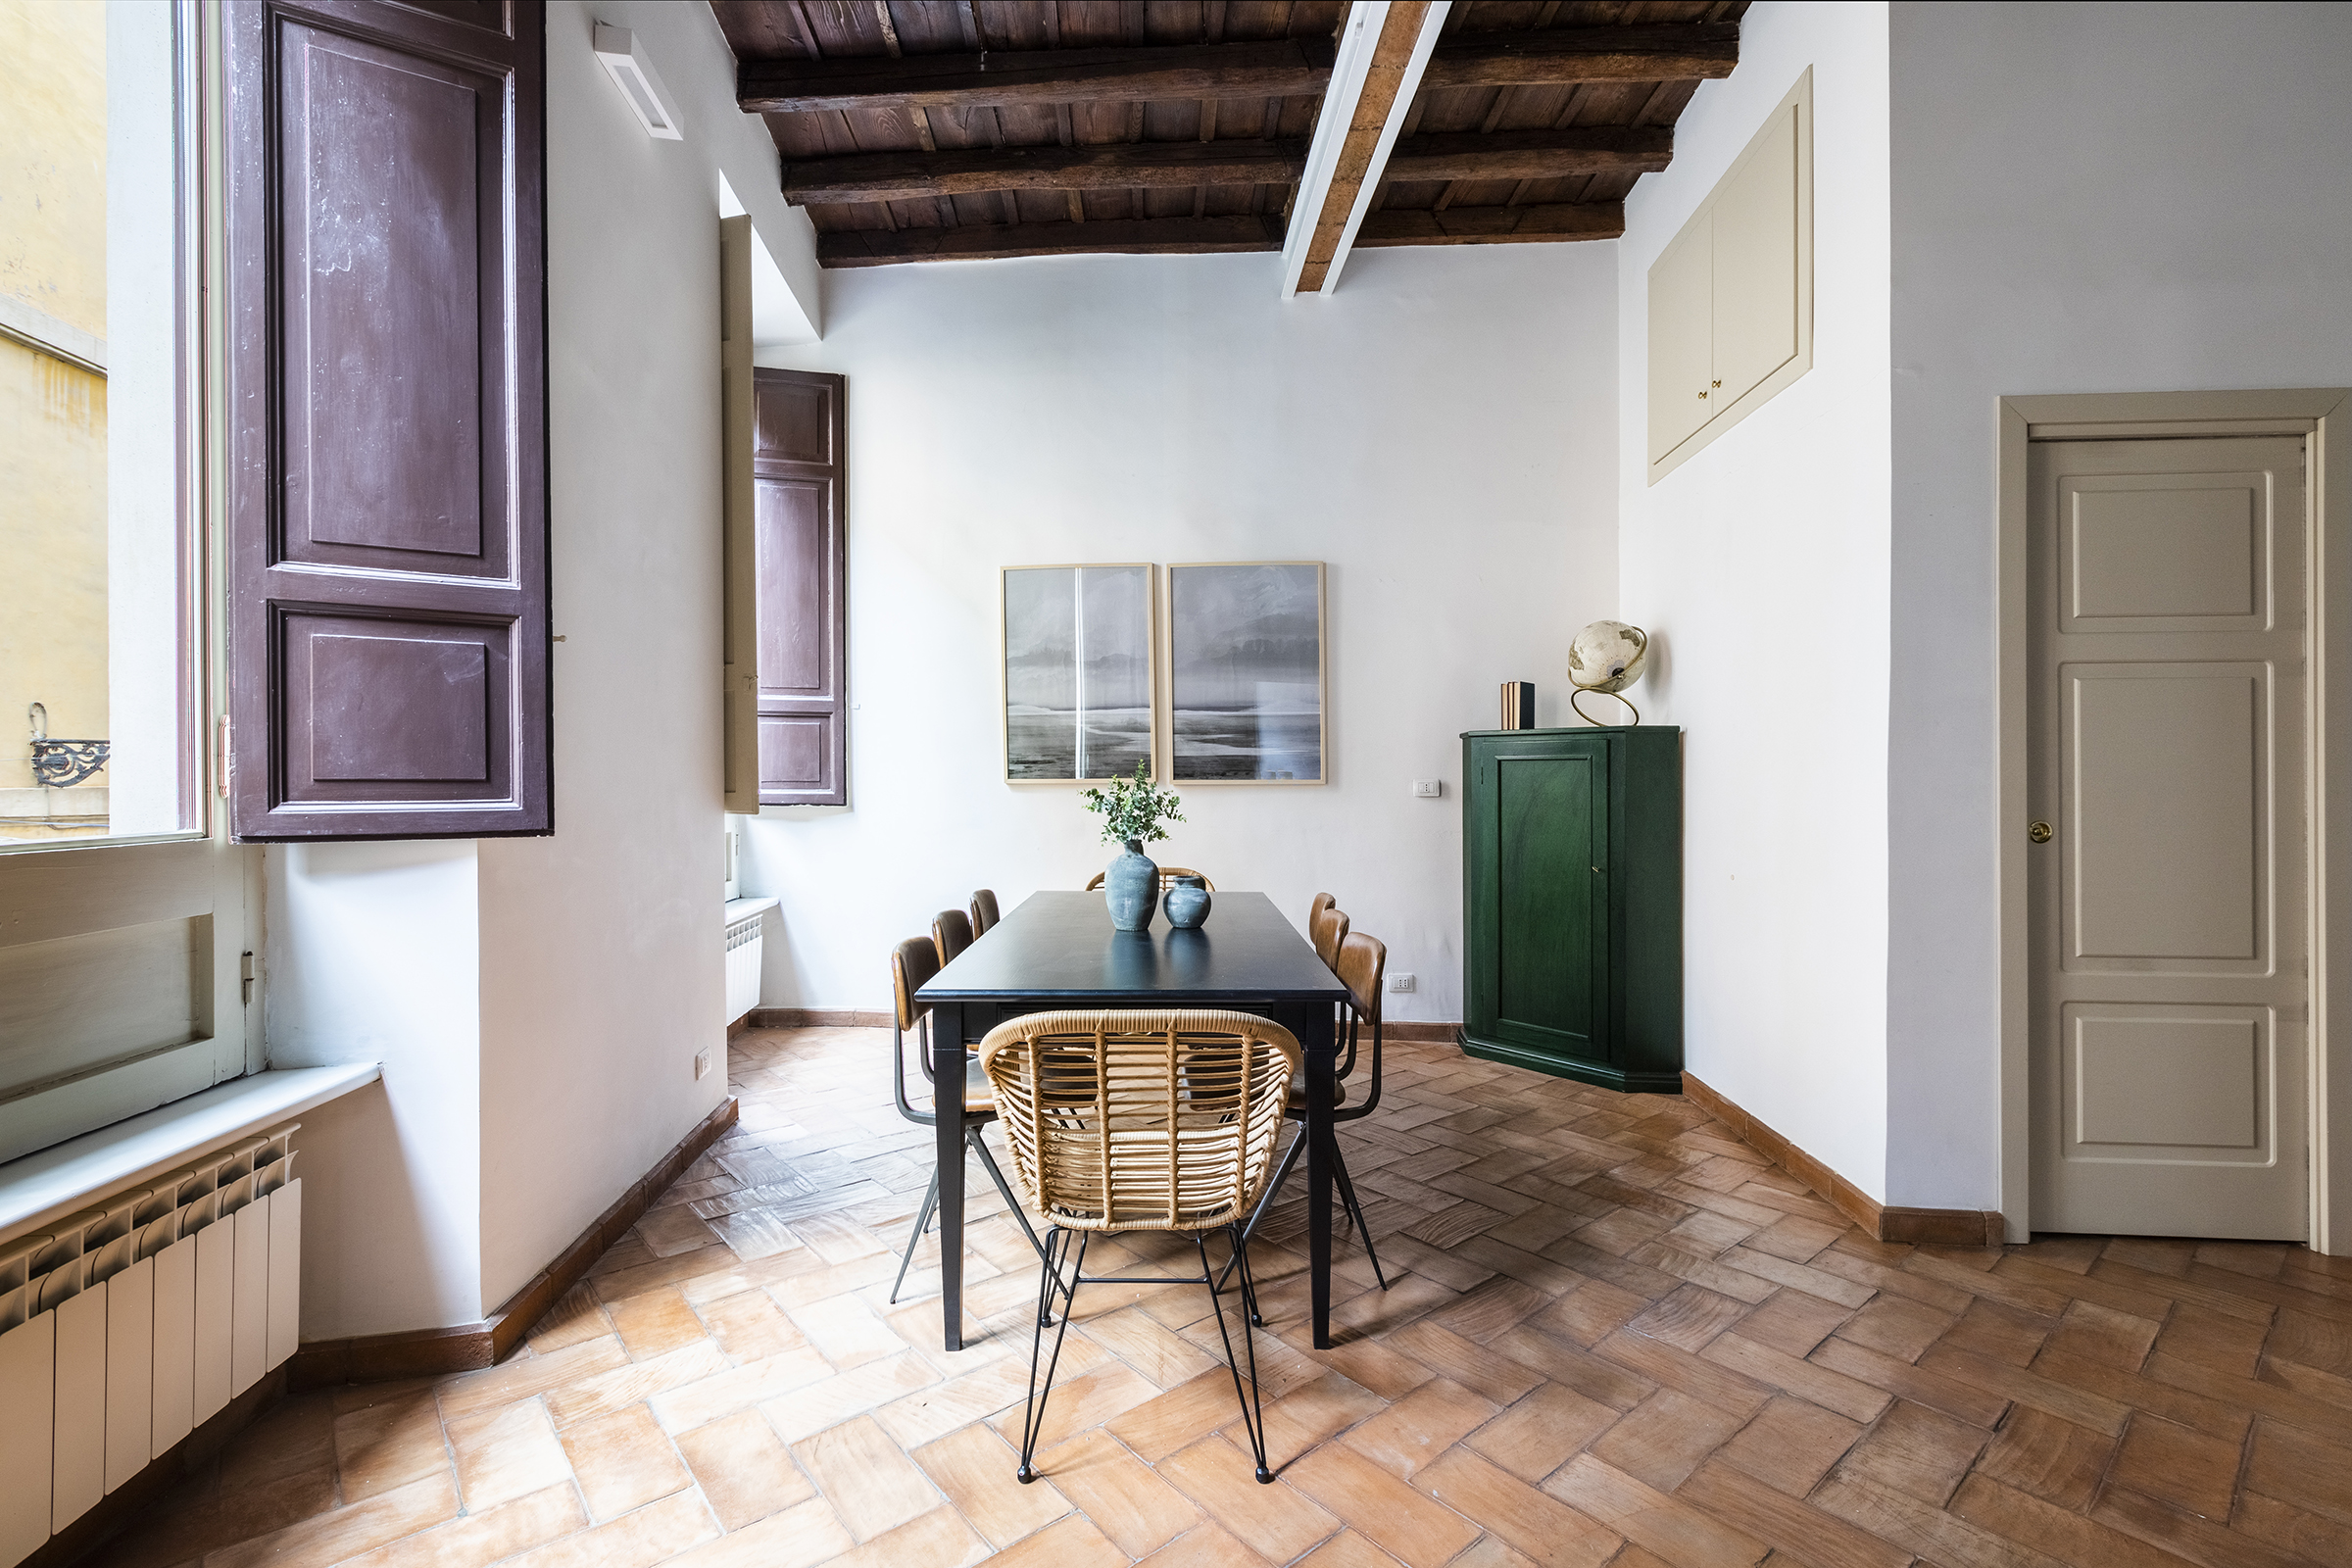 A four-bedroom in Rome Italy available on Sonder. (Sonder)